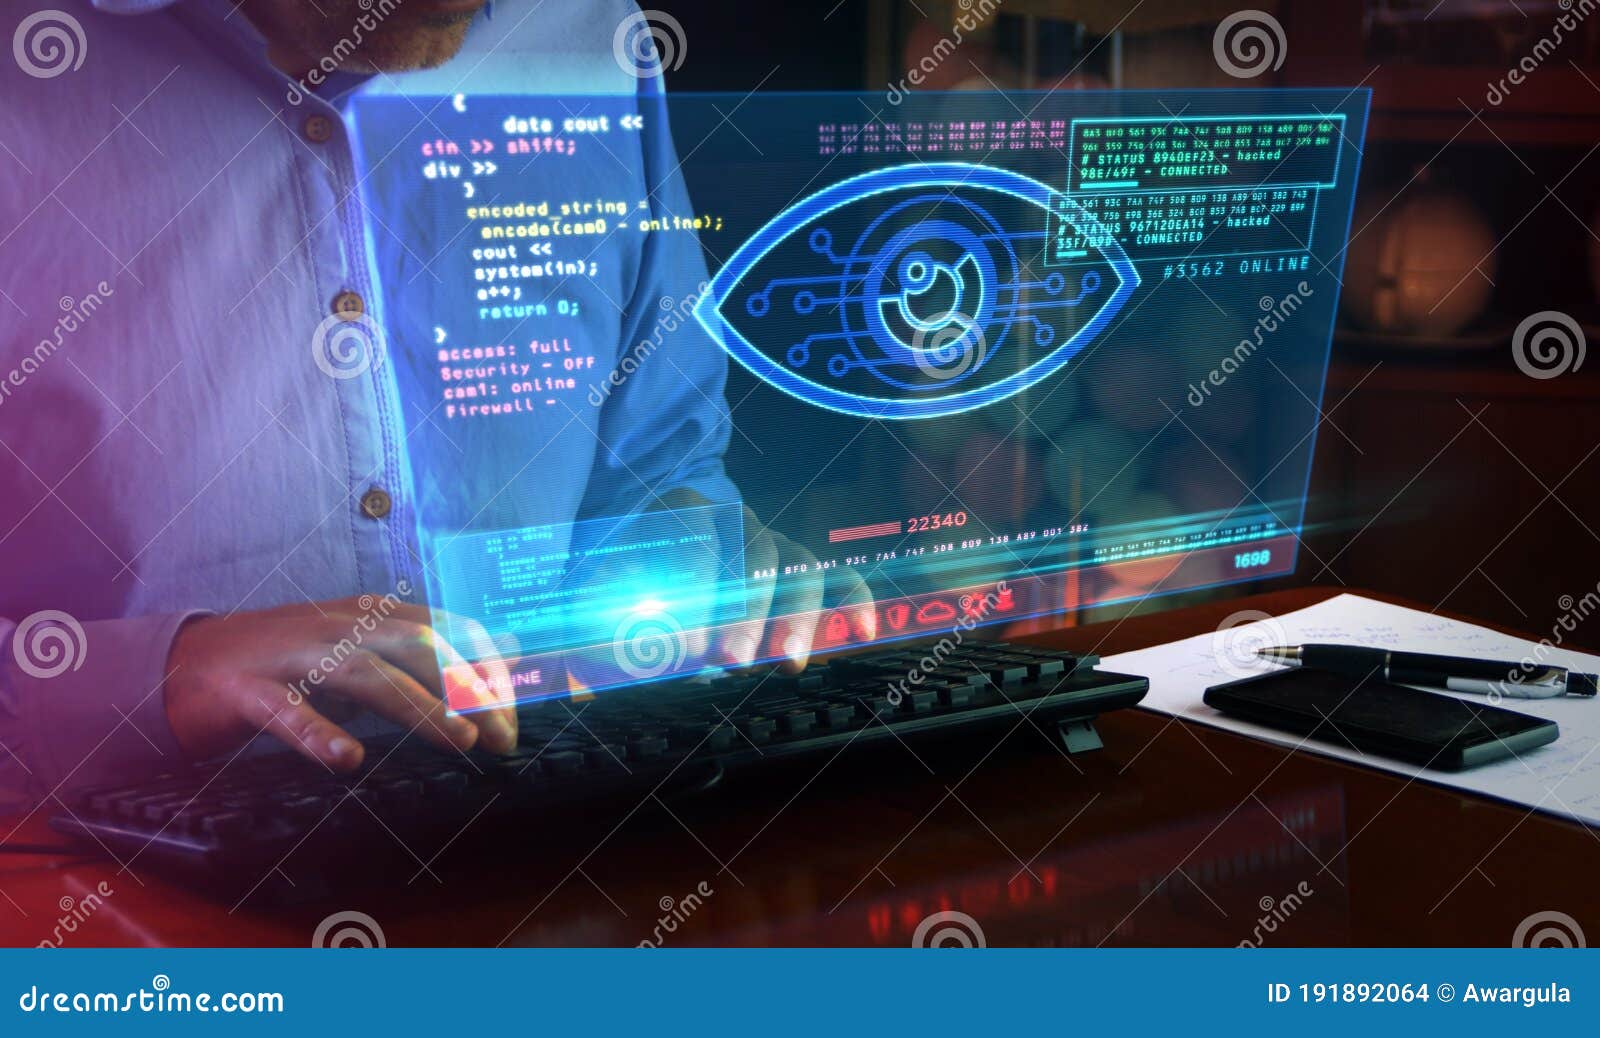 cyber spying hacking and supervise eye  on screen 